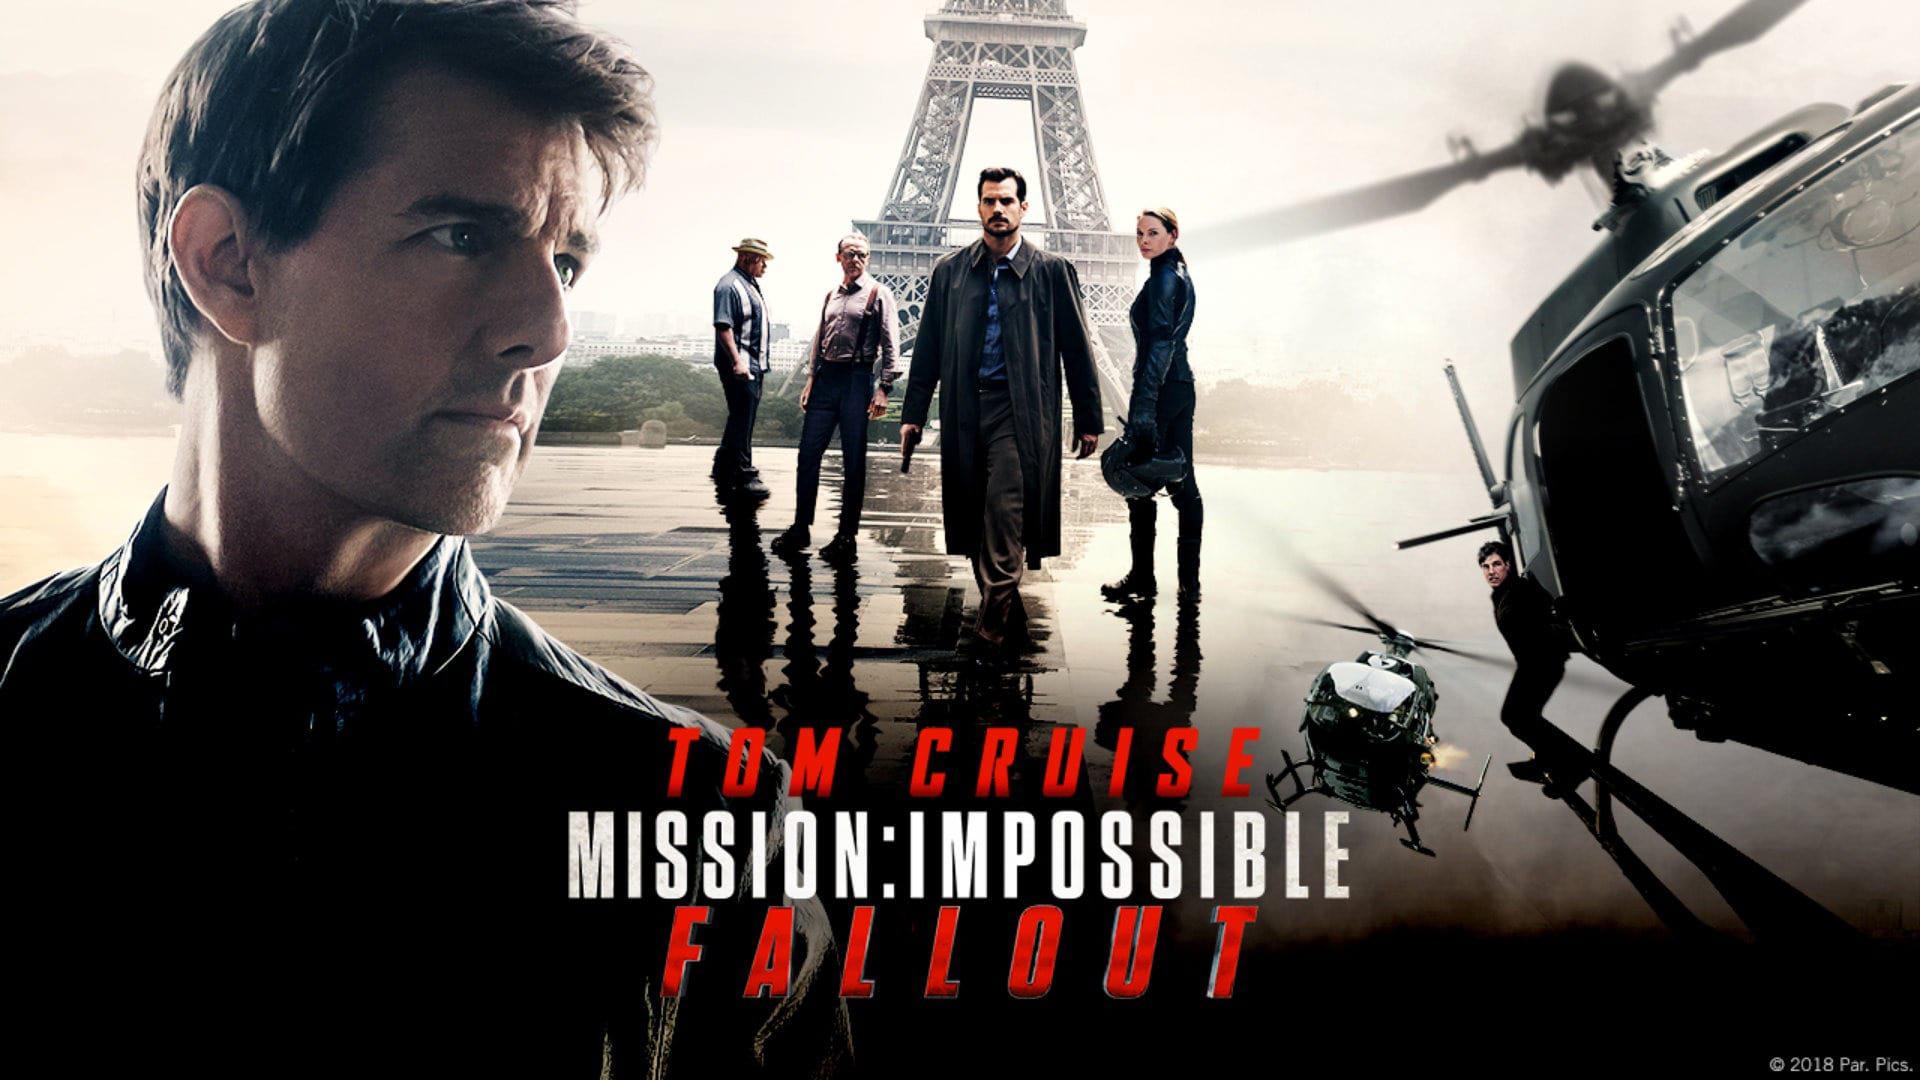 Backdrop Image for Mission: Impossible - Fallout